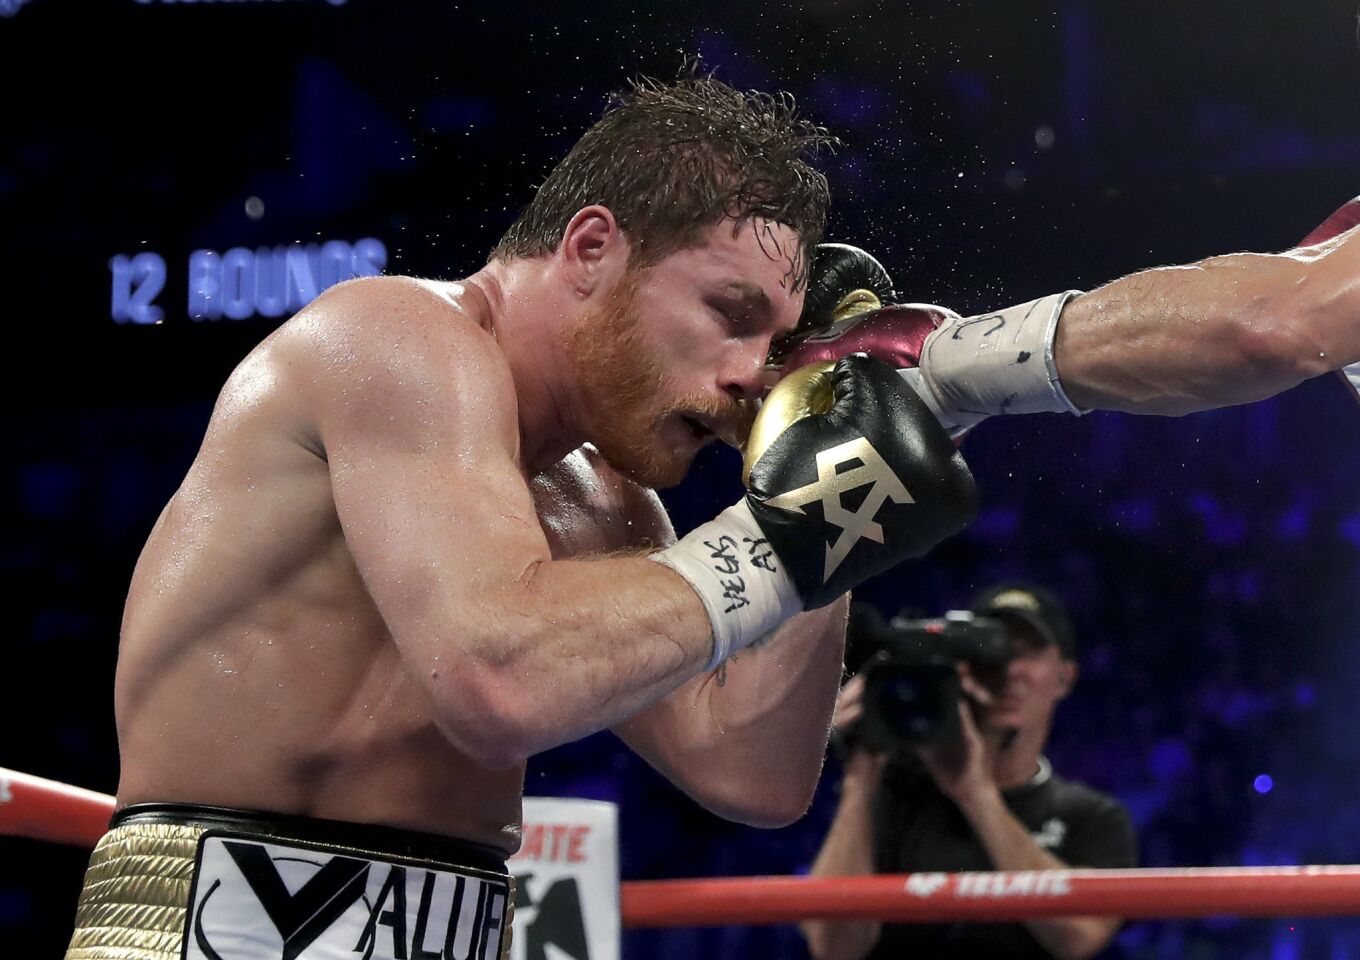 Canelo Alvarez takes a punch from Gennady Golovkin in the 10th round during a middleweight title boxing match, Saturday, Sept. 15, 2018, in Las Vegas.